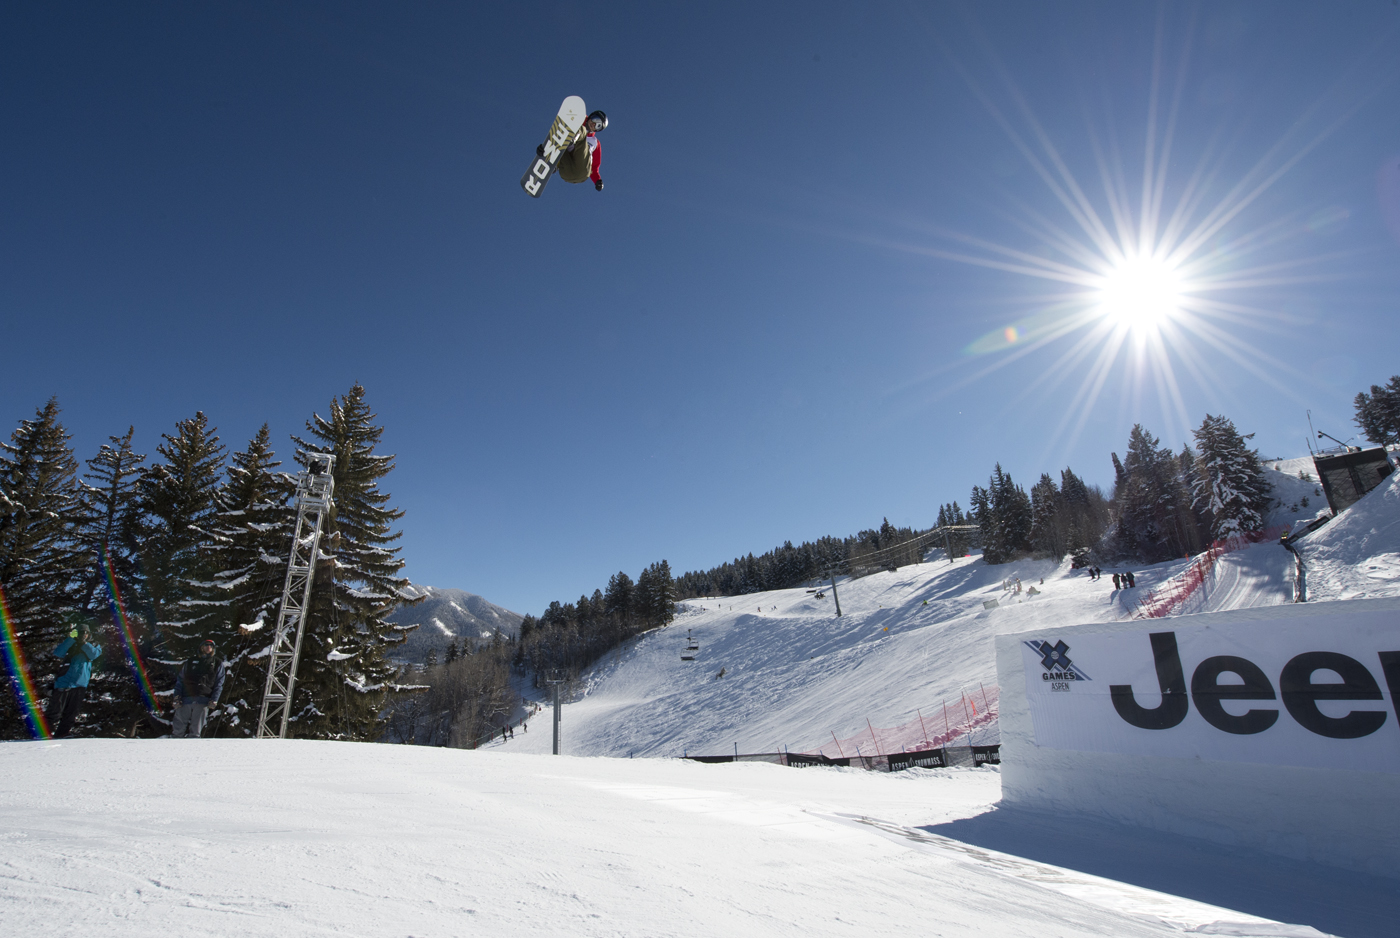 Monster Energy's Stale Sandbech Will Compete in Men's Snowboard Slopestyle at X Games Aspen 2022